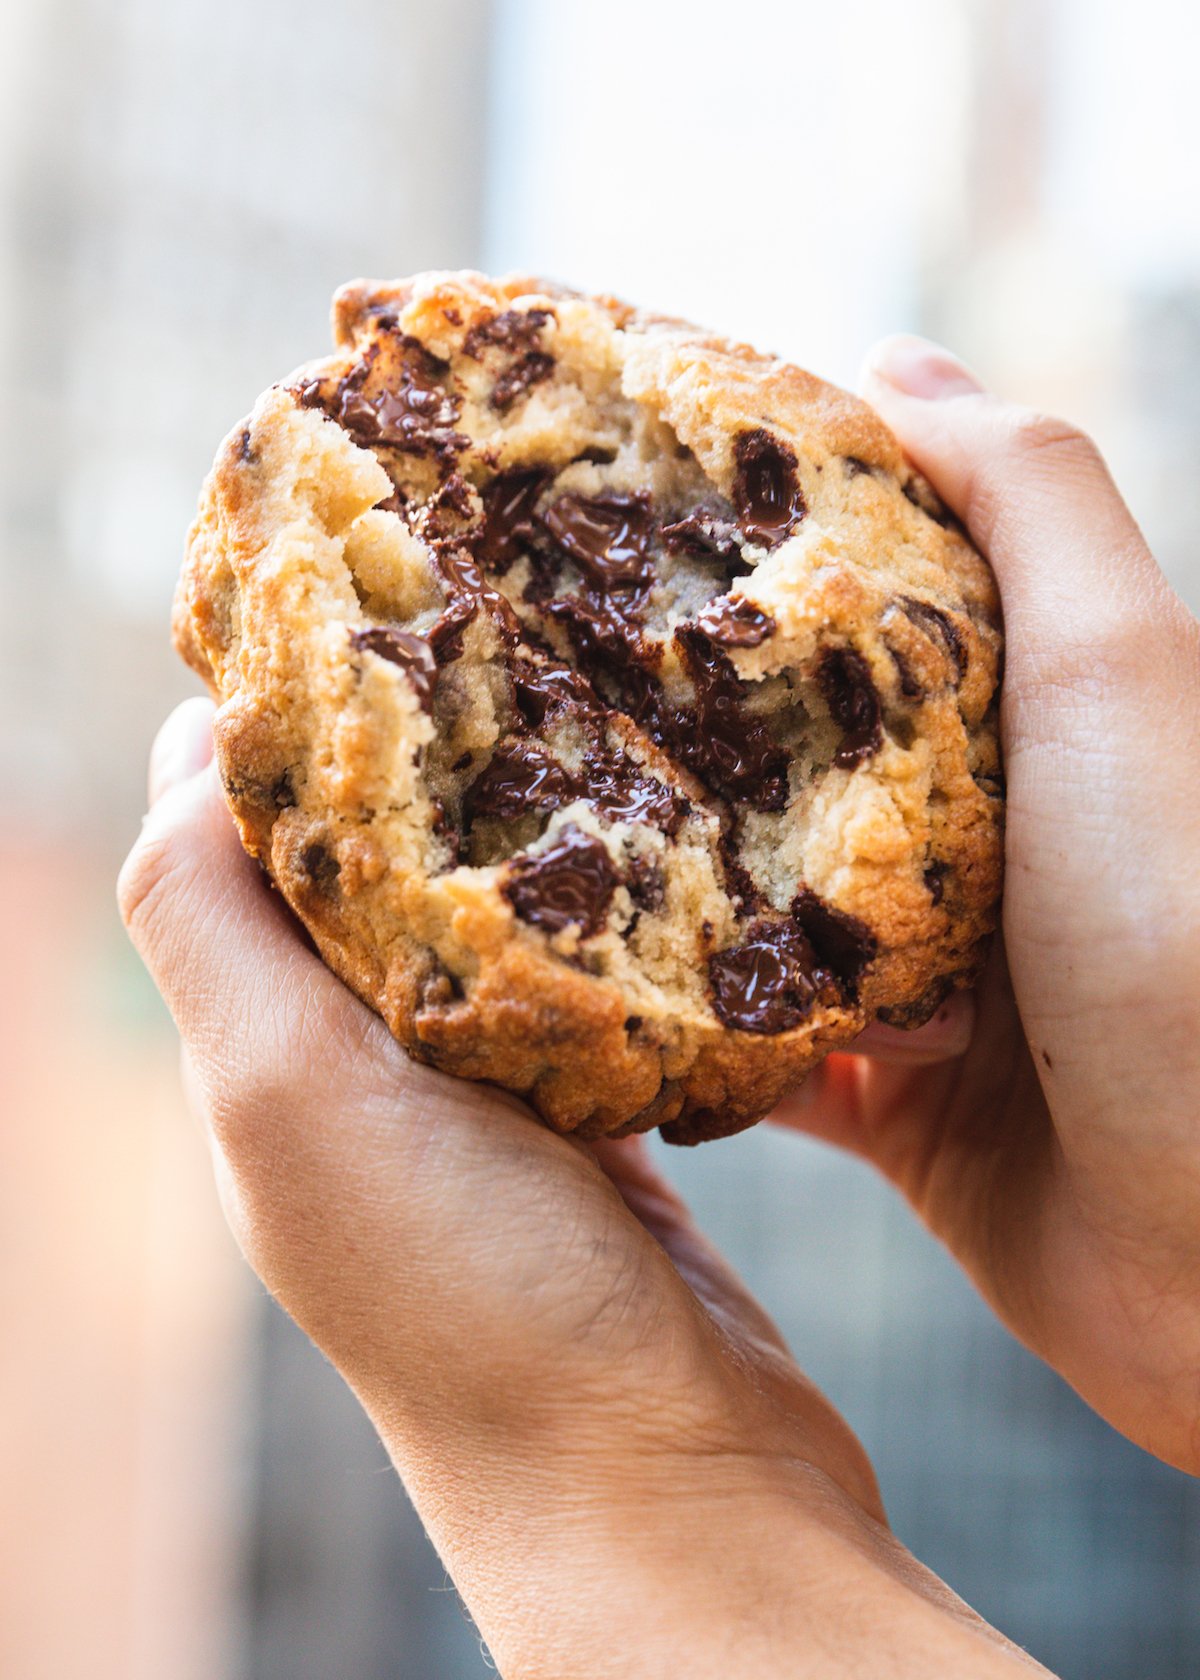 A chocolate chip cookie from Levain Bakery. Photograph by Kate Previte